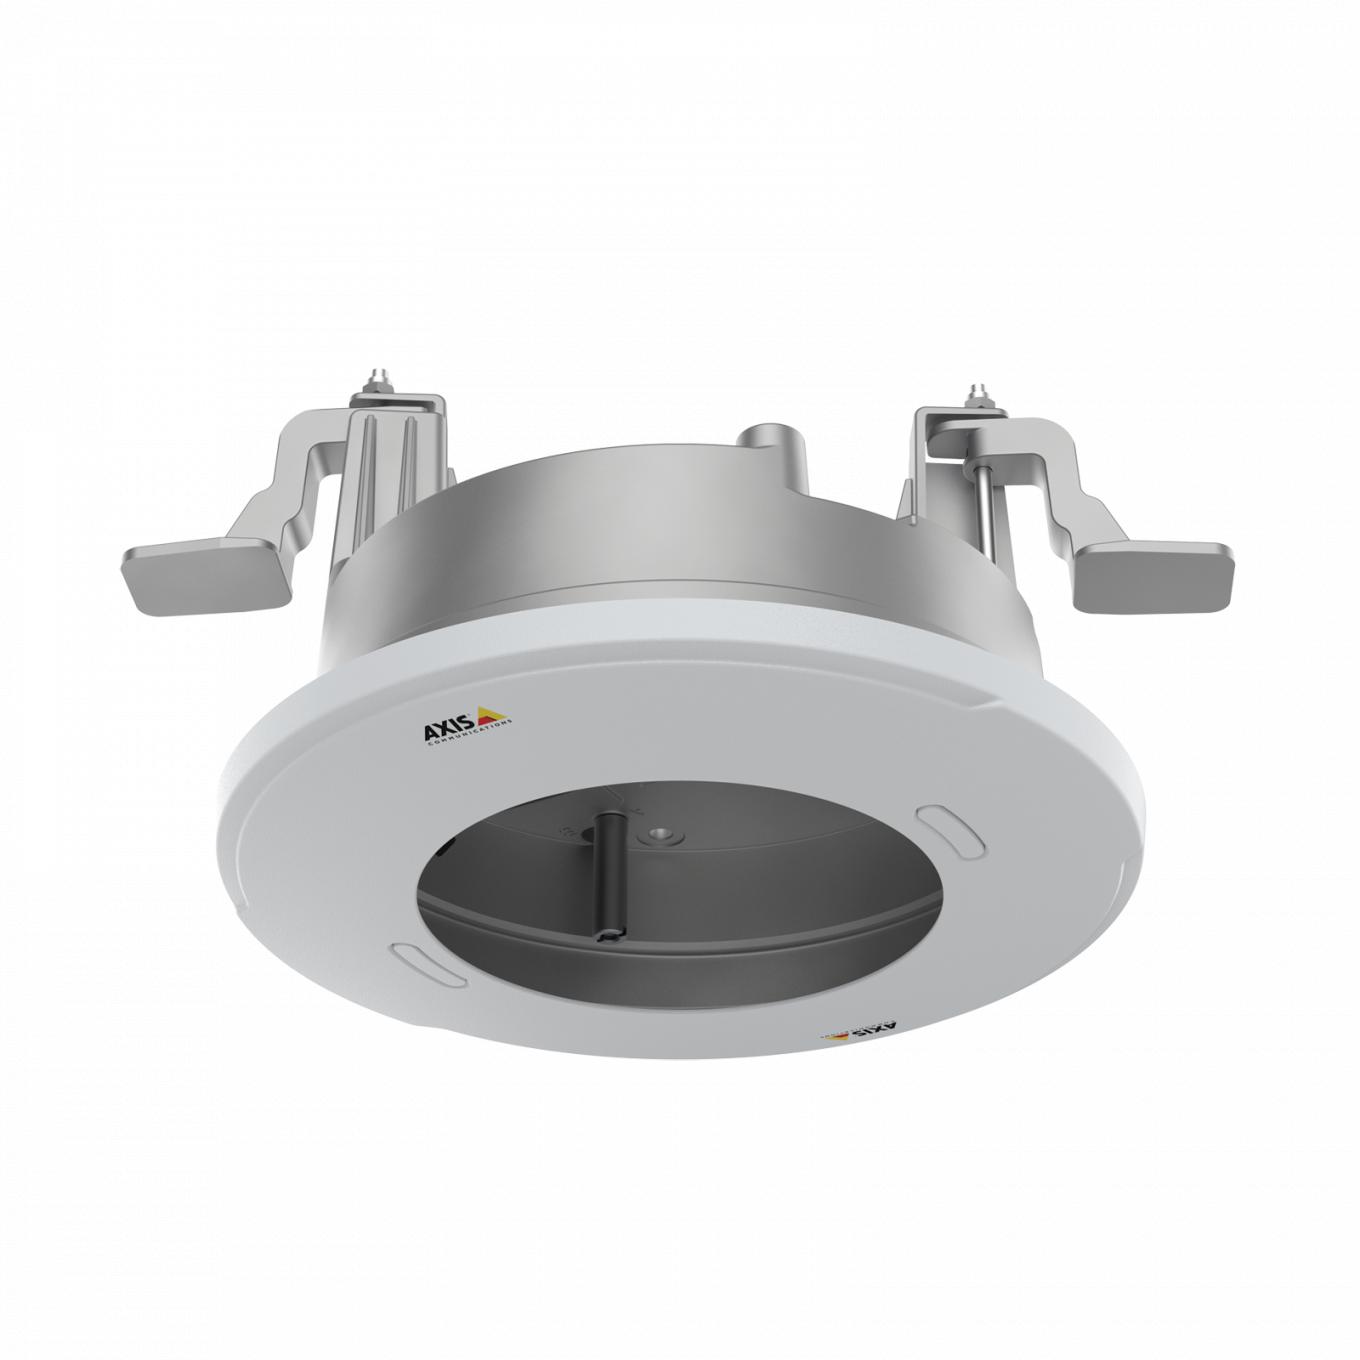 AXIS TM3206 Plenum Recessed Mount, viewed from its left angle